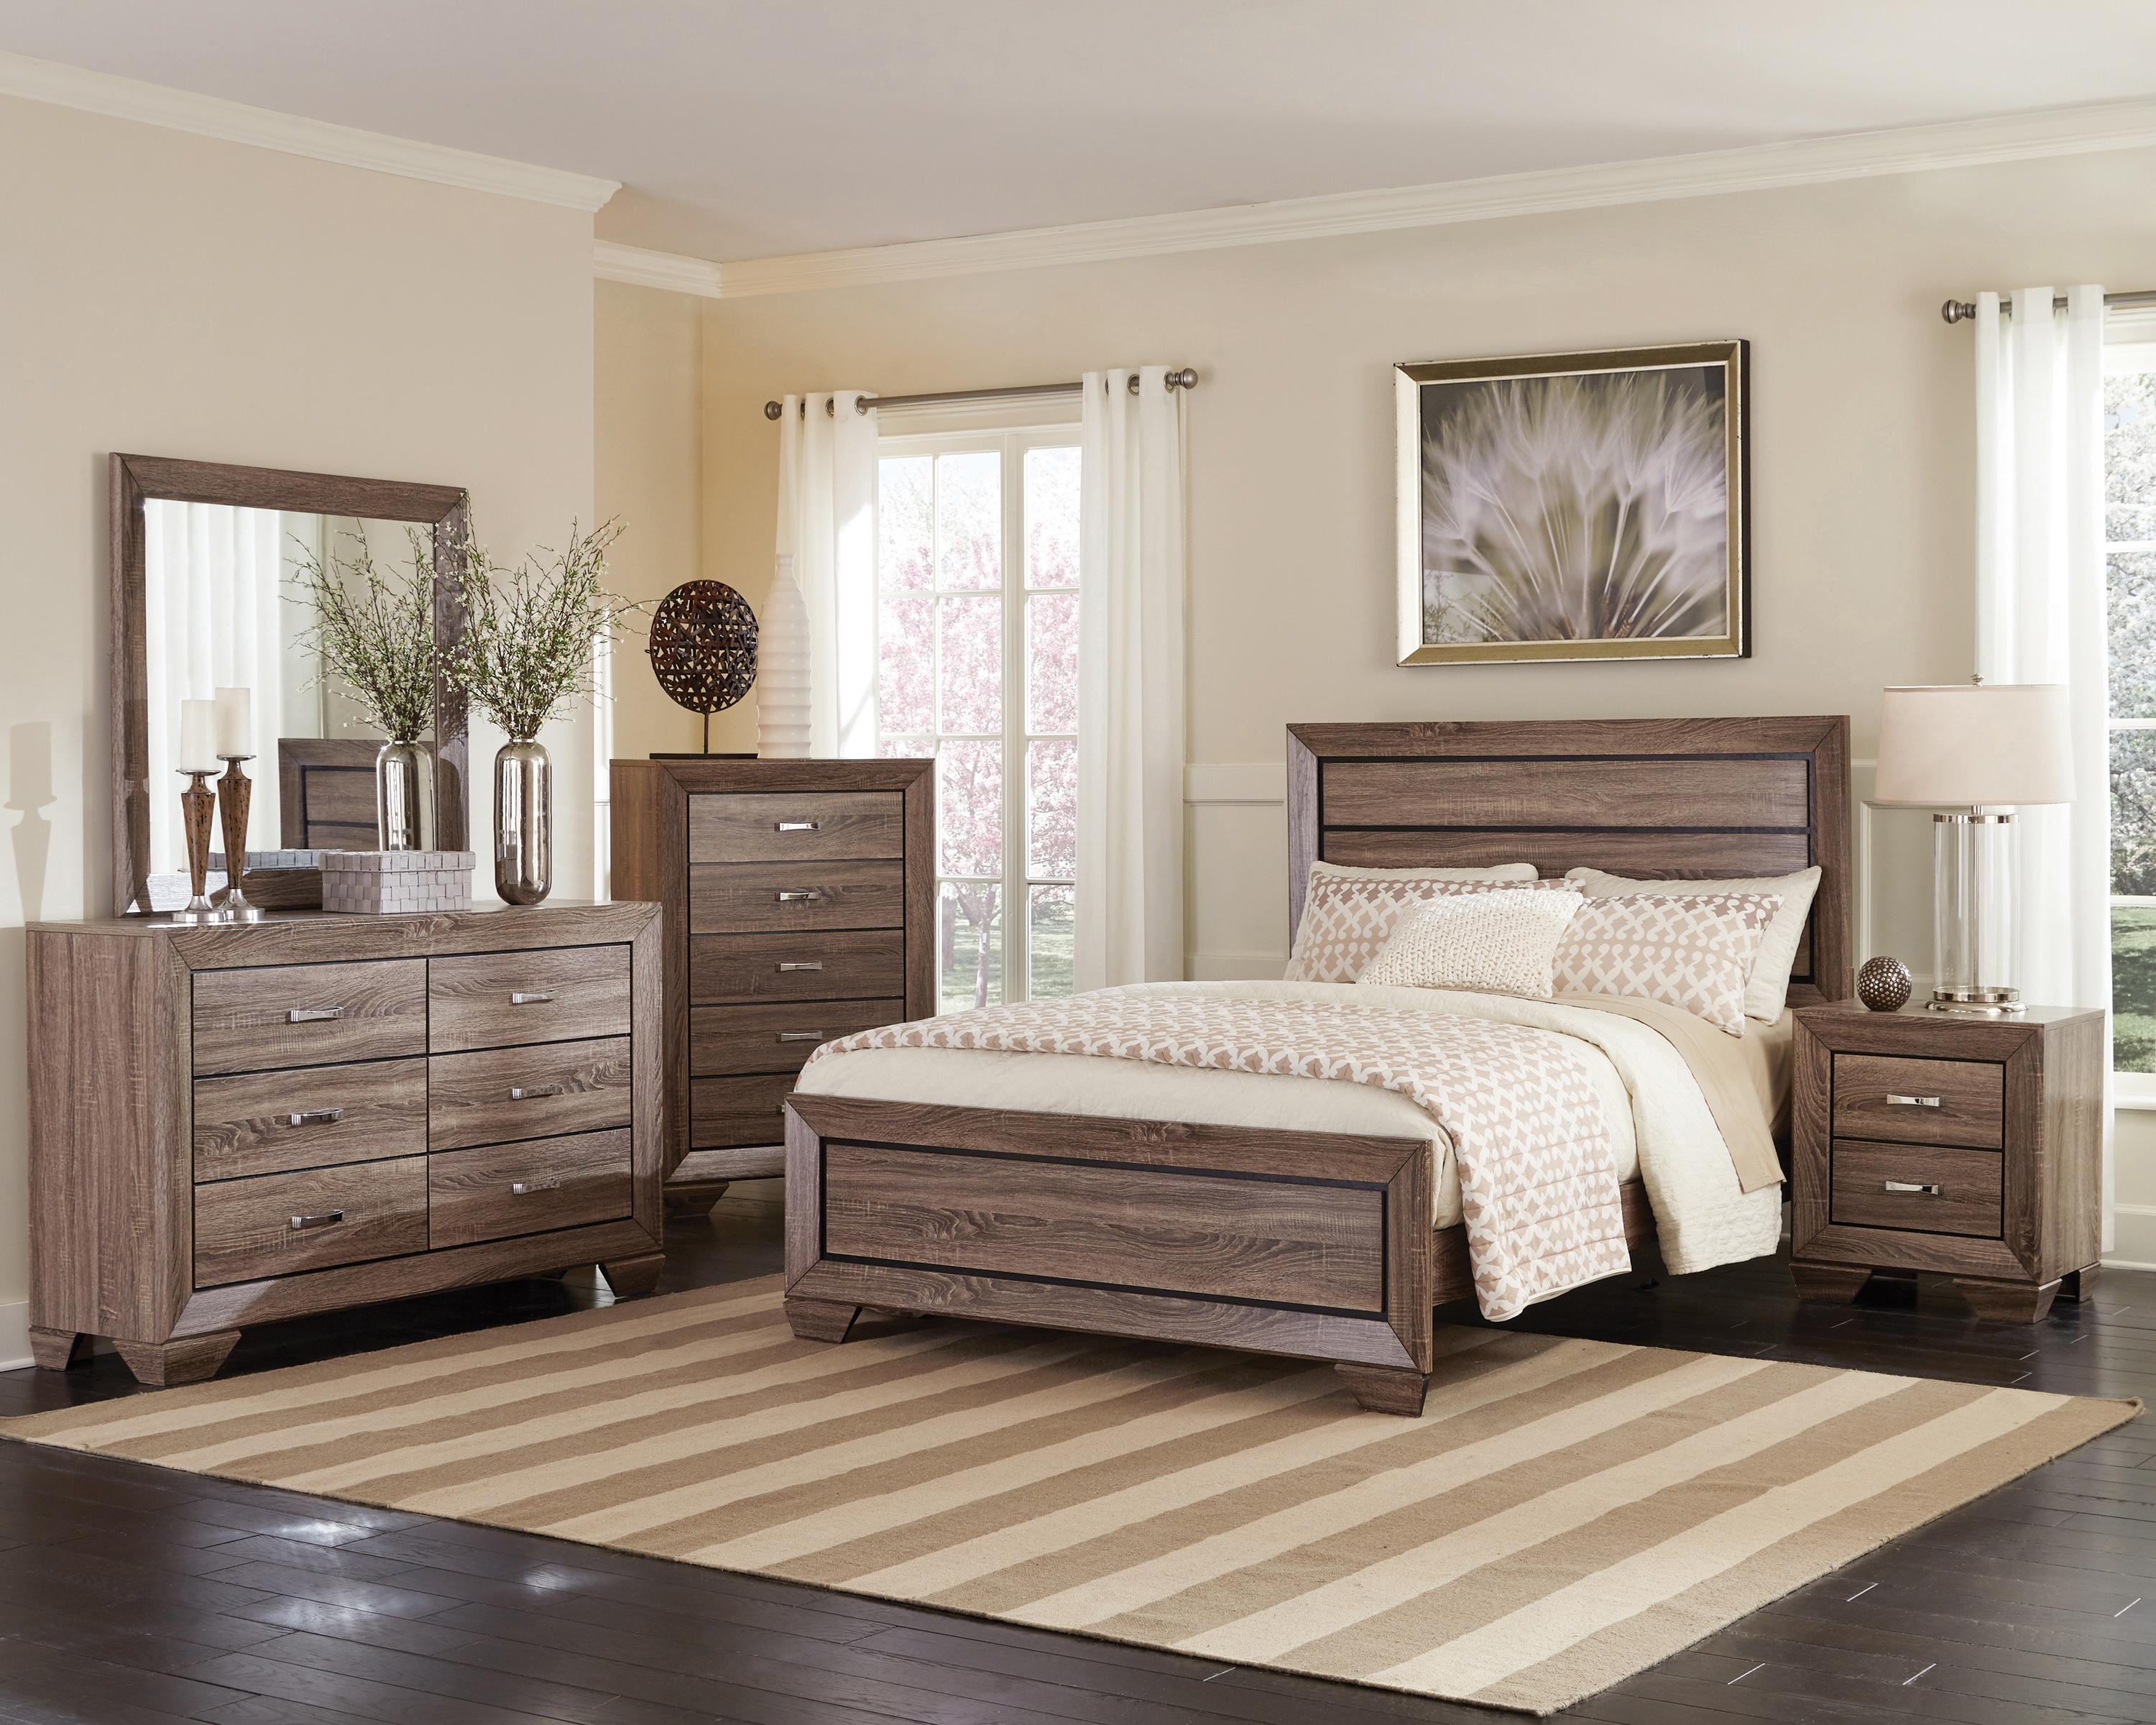 Transitional Bedroom Set 204191KW-6PC Kauffman 204191KW-6PC in Taupe 